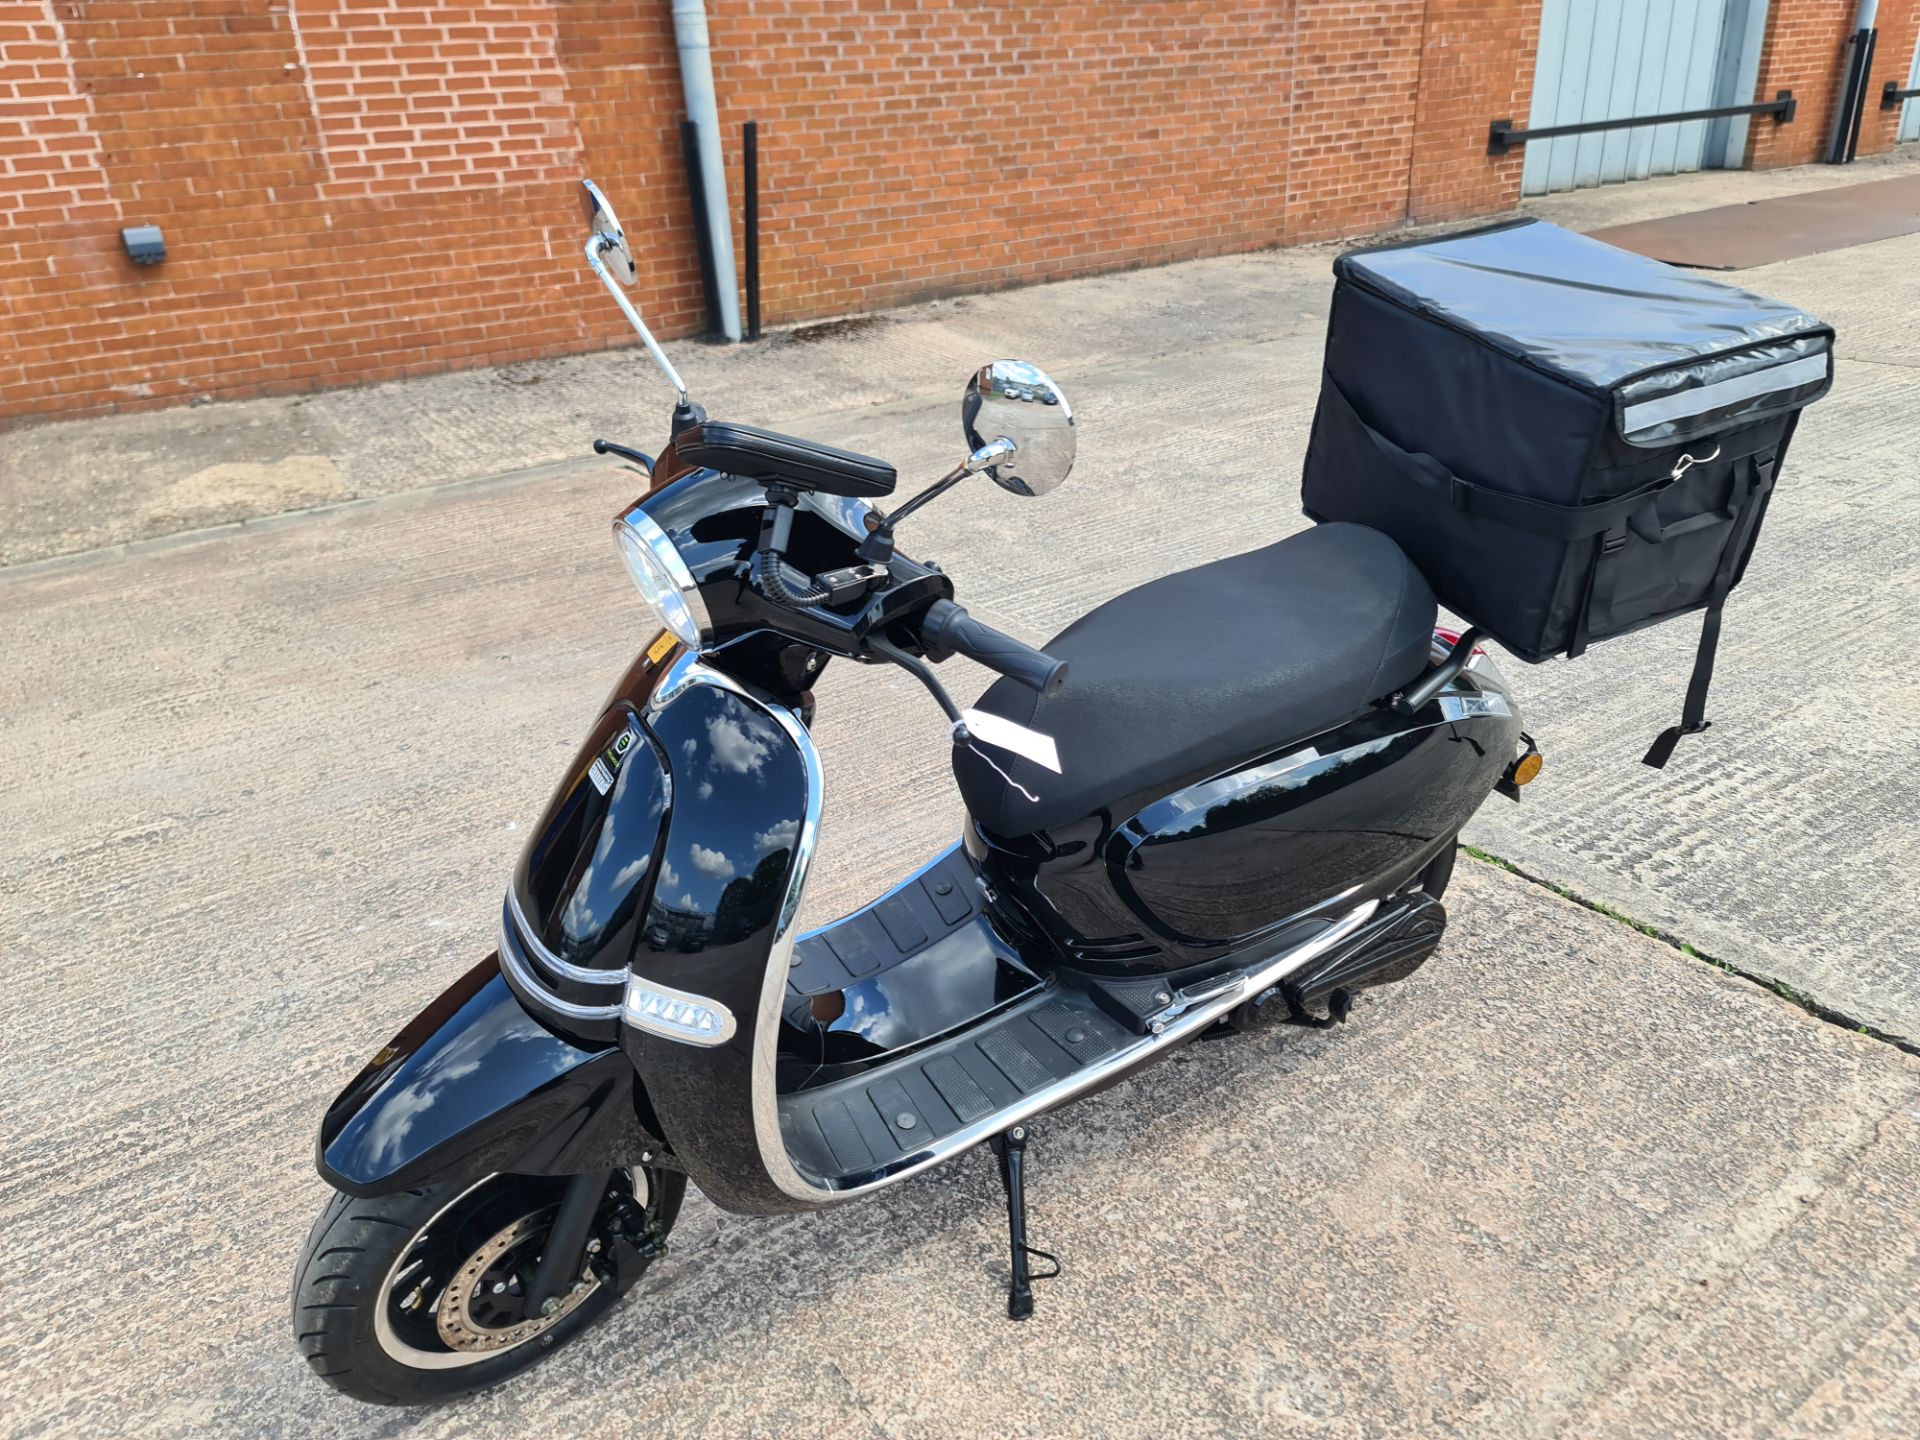 LO22 WLK Ultra 5000 electric scooter, colour: black, 125cc equivalent, 60mph top speed, 60 mile rang - Image 2 of 27